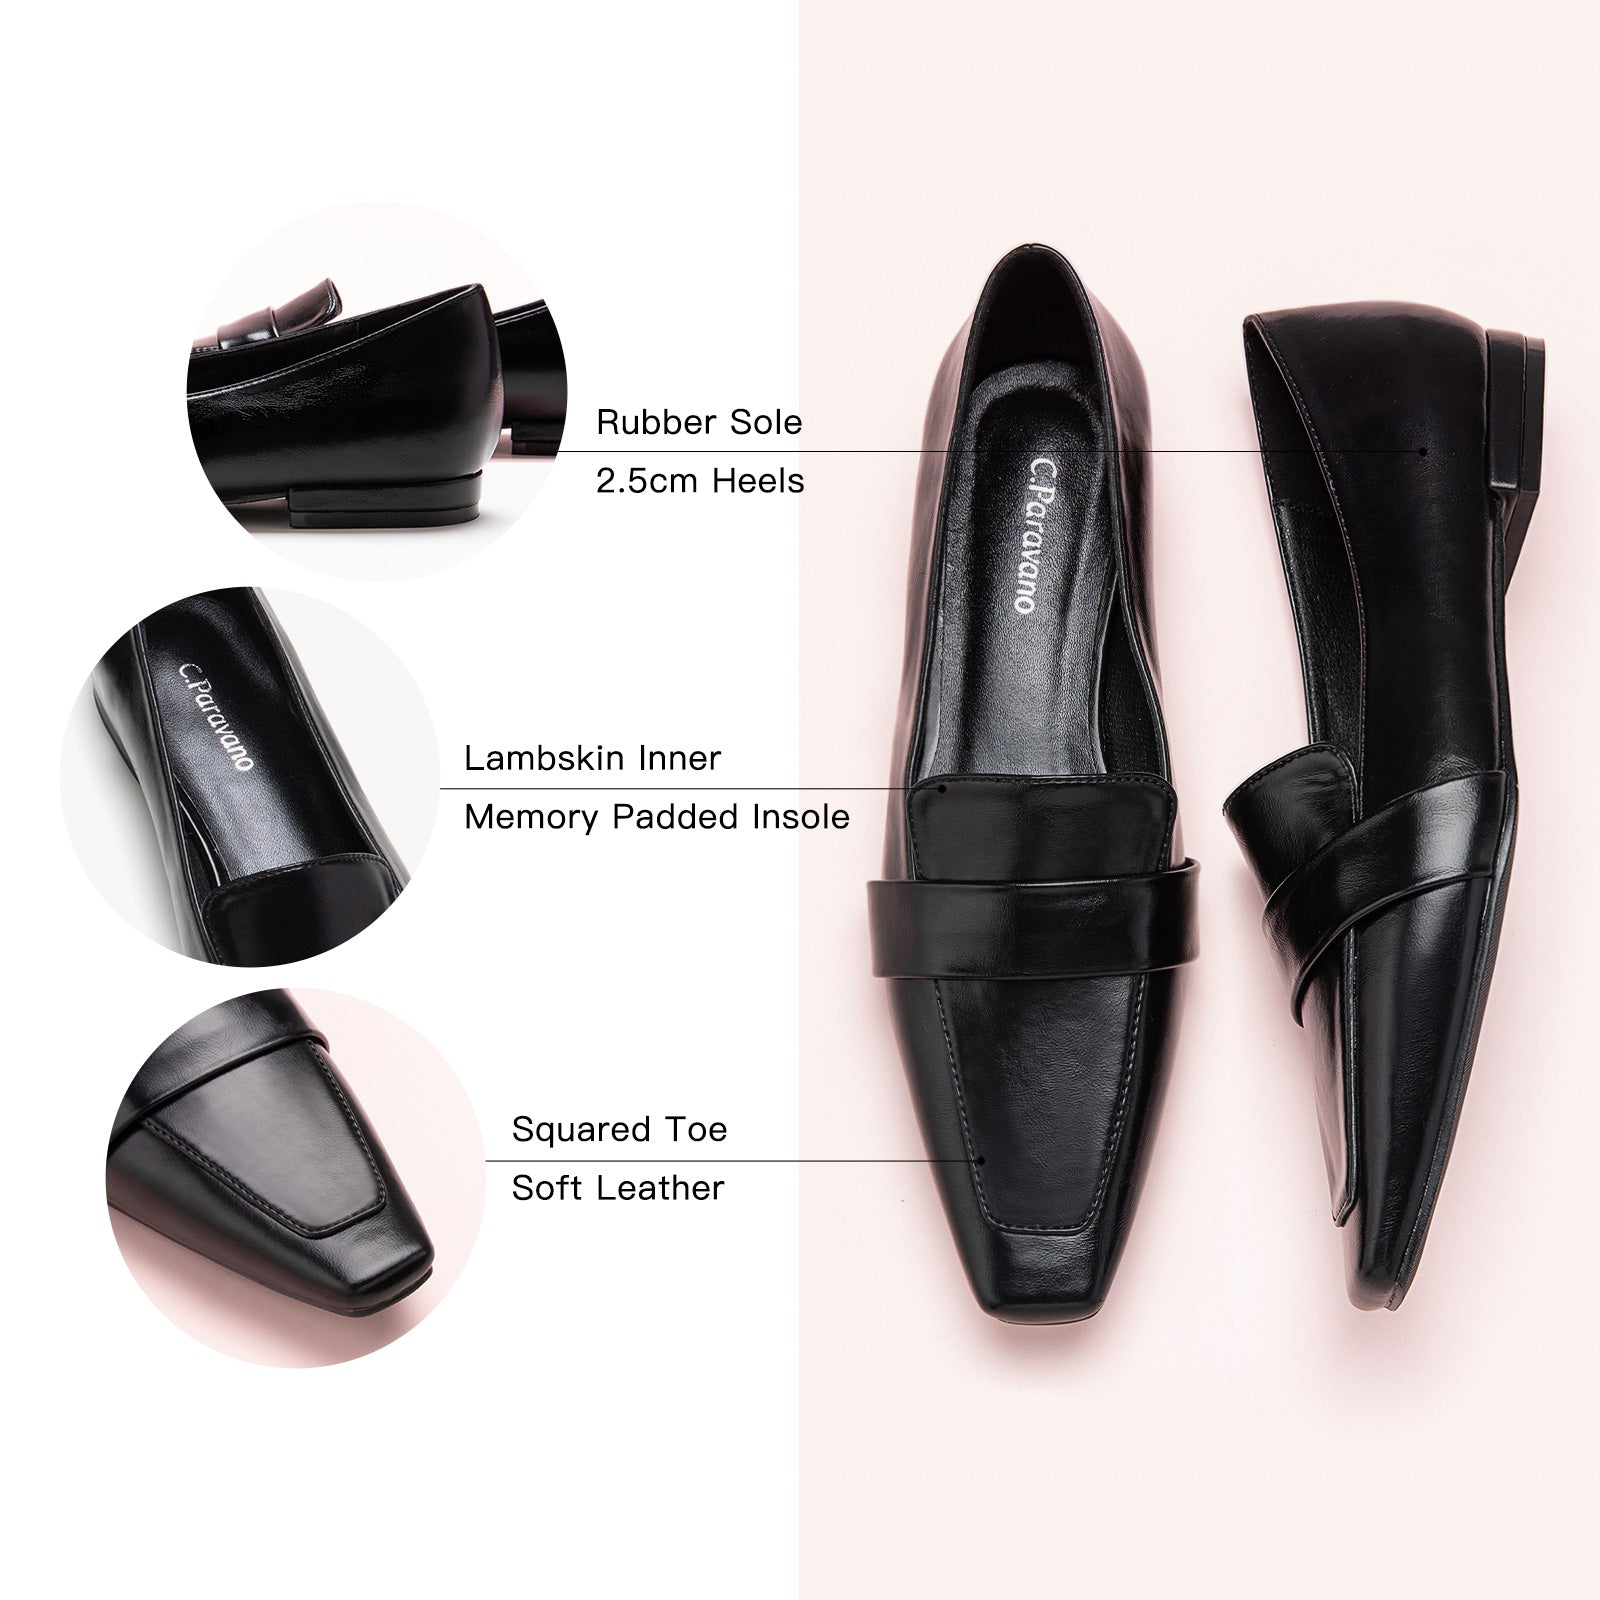 Black Penny Strap Platform Loafers, a classic and stylish choice for making a statement